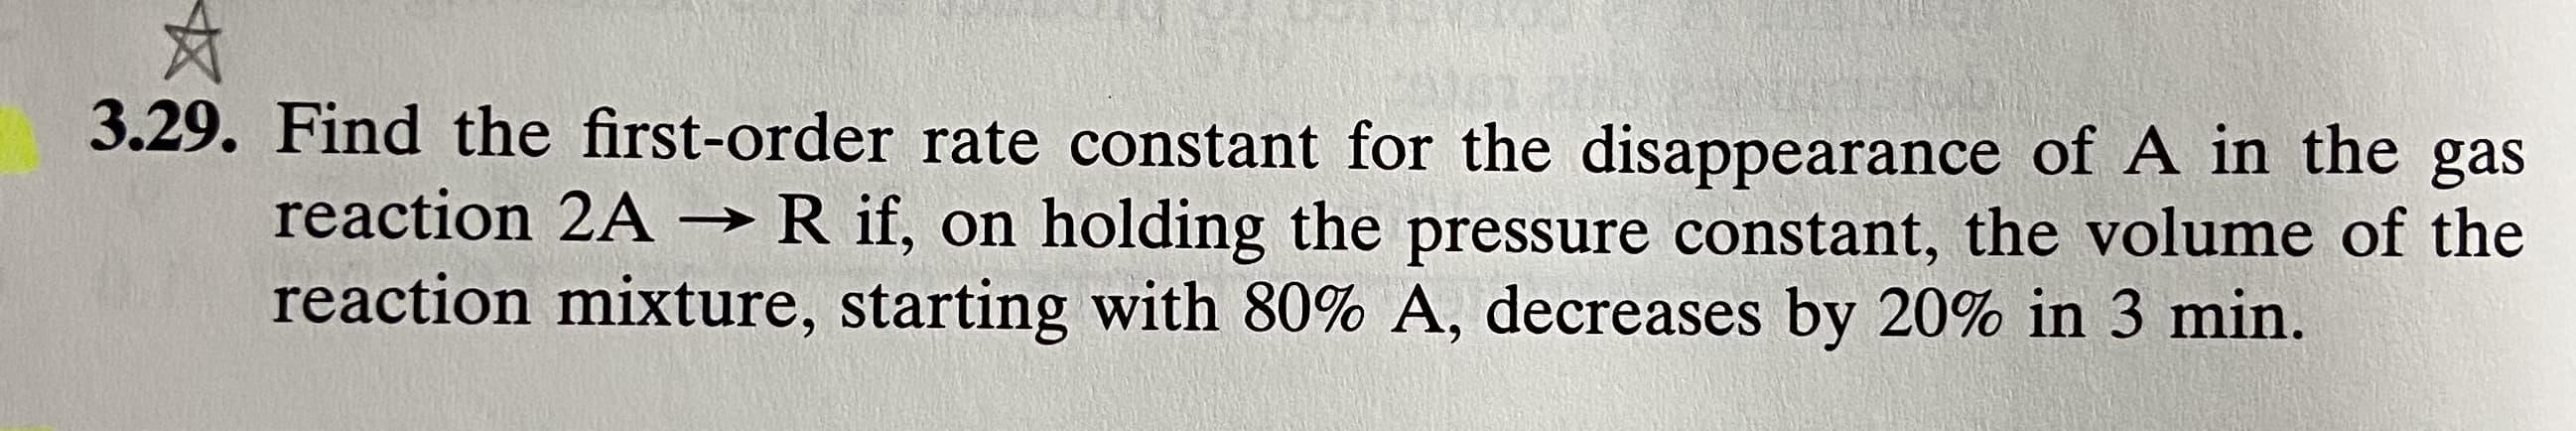 3.29. Find the first-order rate constant for the disappearance of A in the gas
reaction 2A →R if, on holding the pressure constant, the volume of the
reaction mixture, starting with 80% A, decreases by 20% in 3 min.
